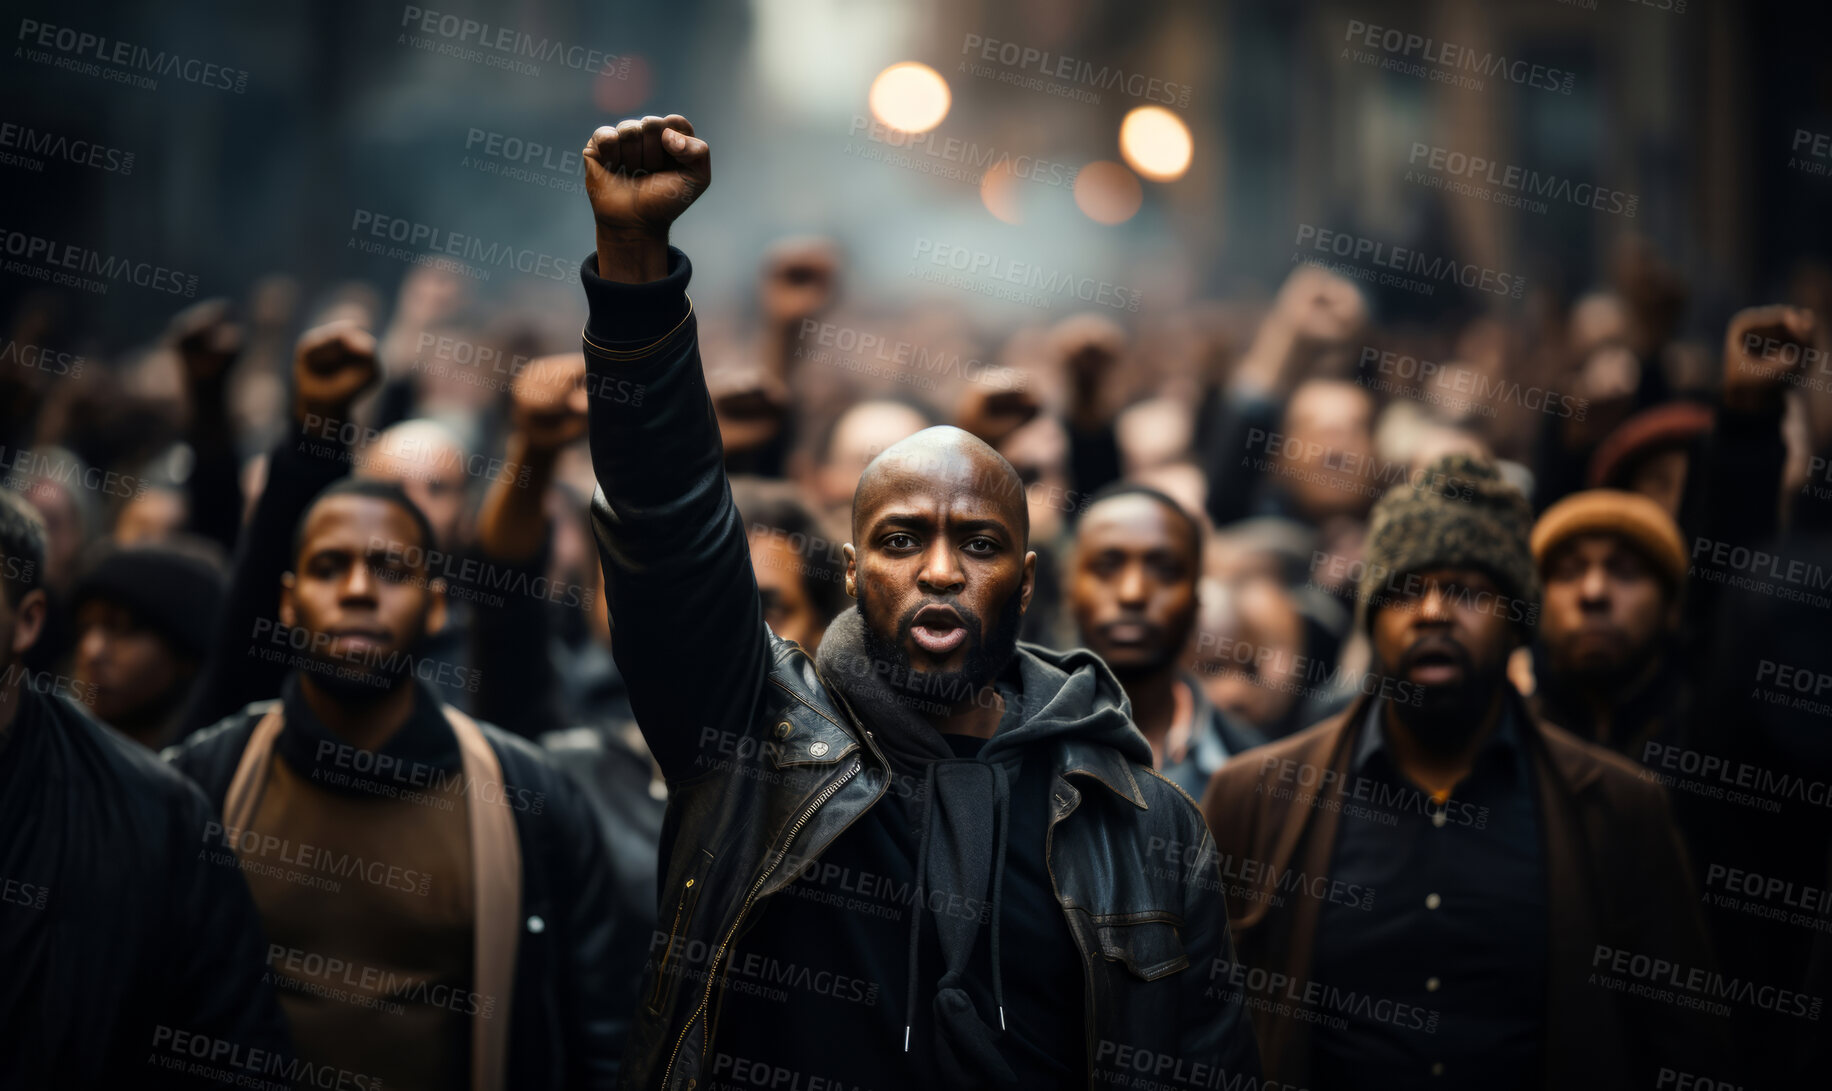 Buy stock photo Protesters raising fists in city. Human rights, Activism concept.